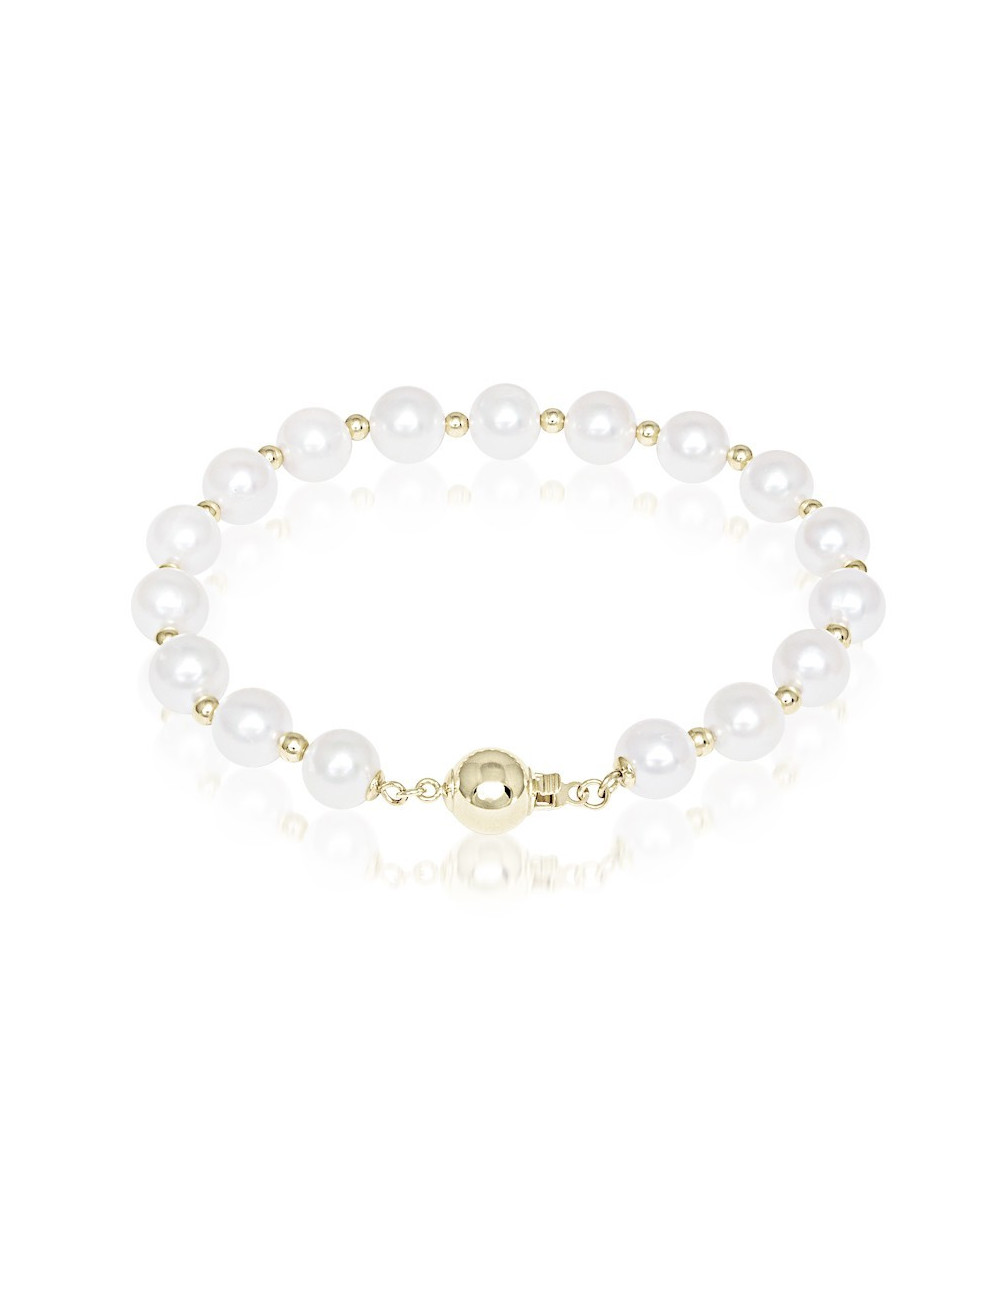 Bracelet with alternating strings of white freshwater pearls and golden beads B089G3